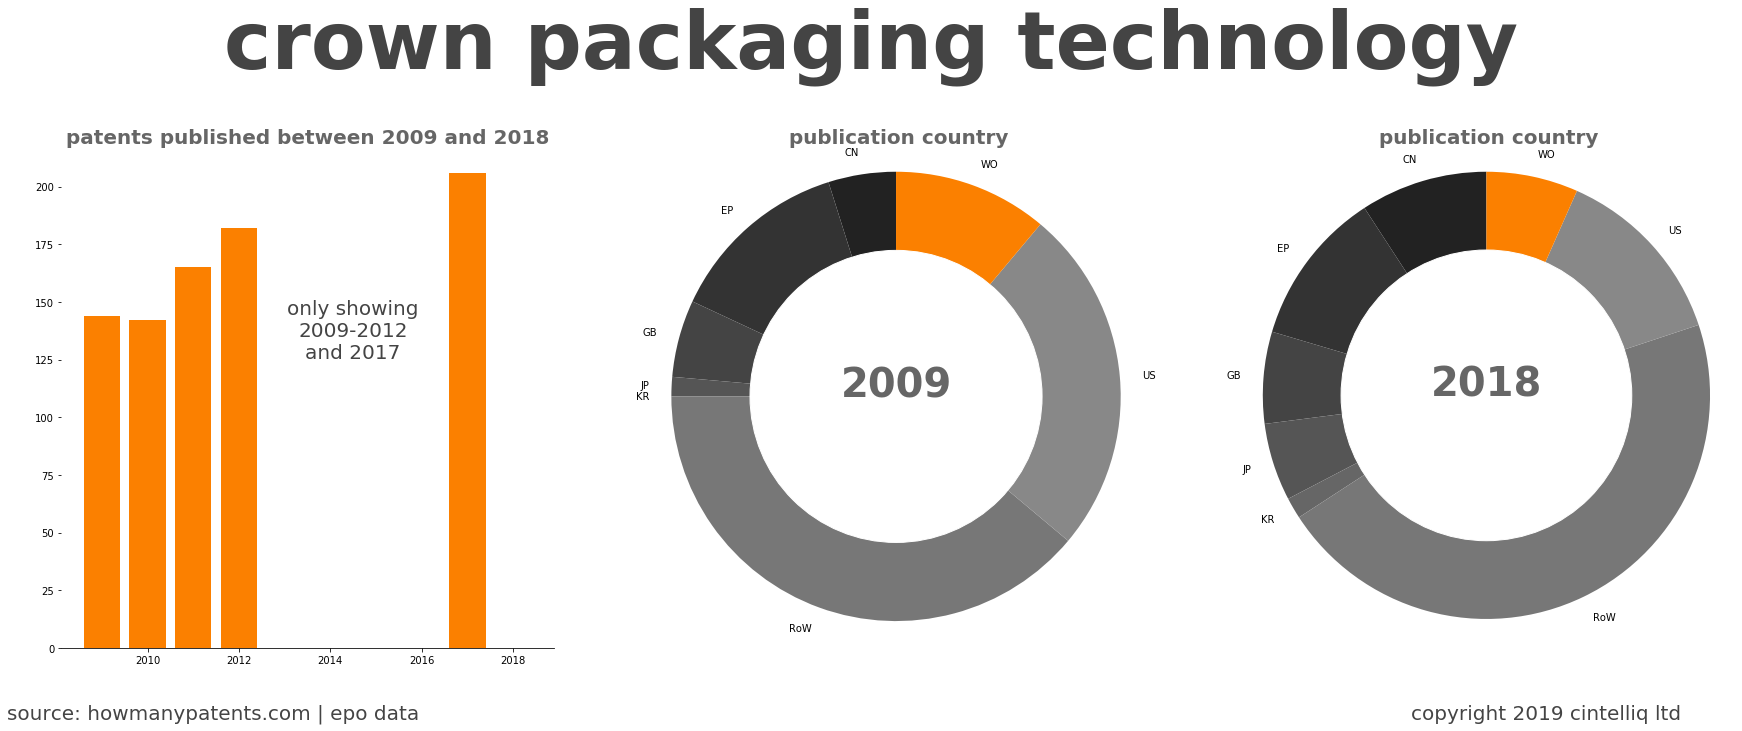 summary of patents for Crown Packaging Technology